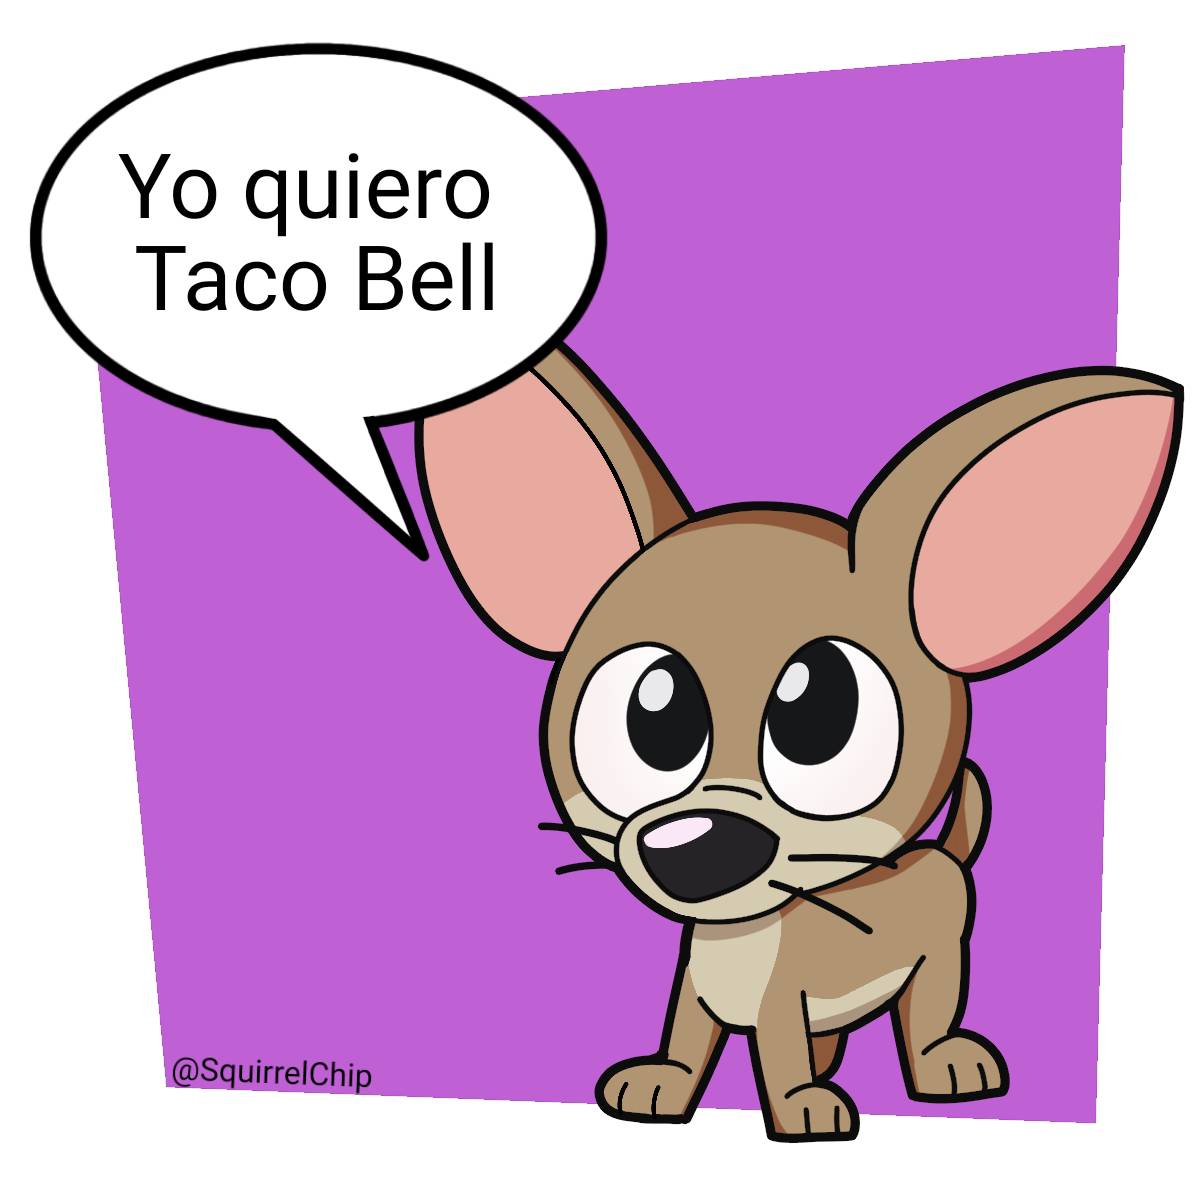 Taco Bell Chihuahua by SquirrelChip on DeviantArt